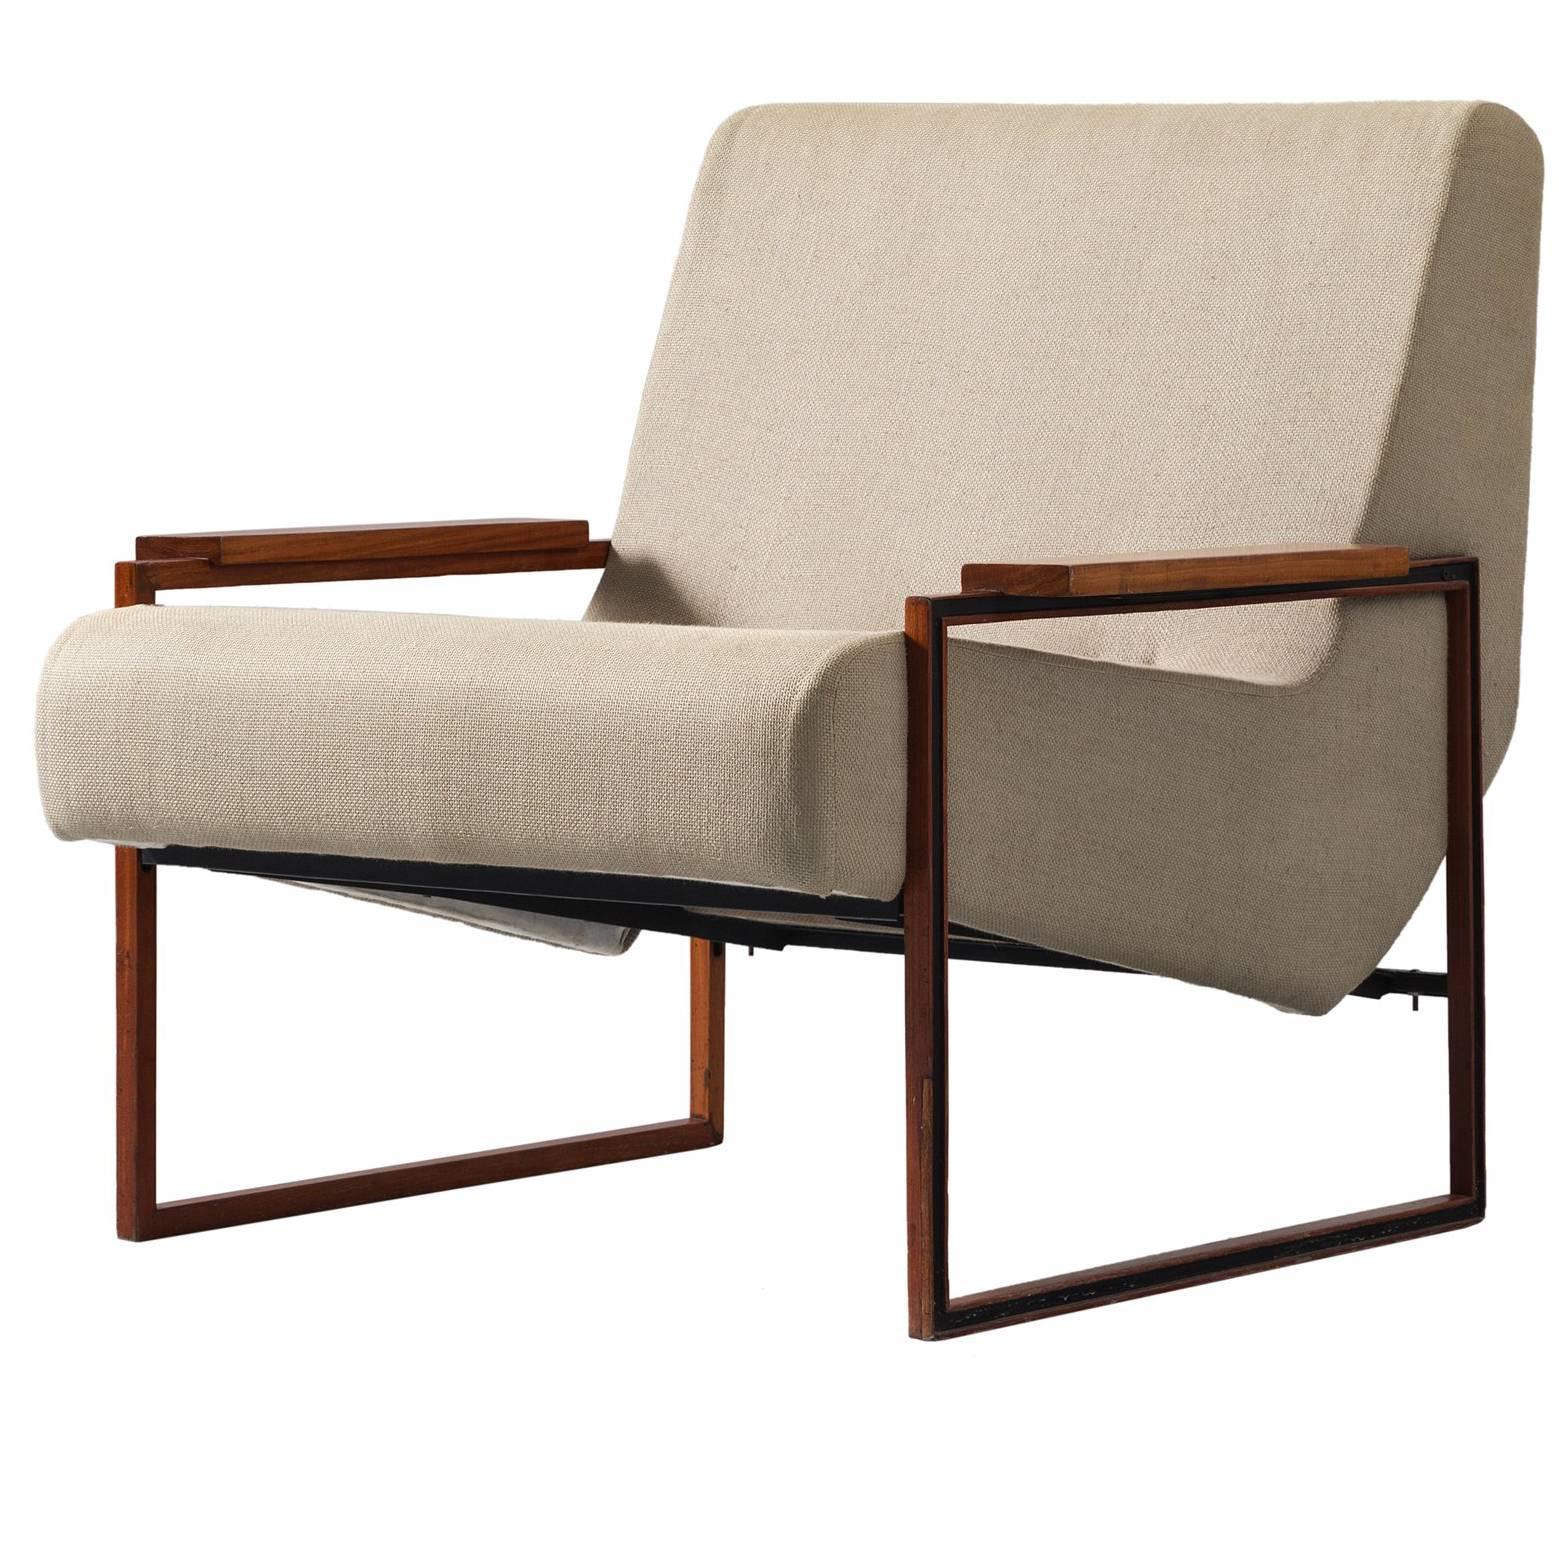 Percival Lafer Lounge Chair in Mahogany and Fabric Upholstery